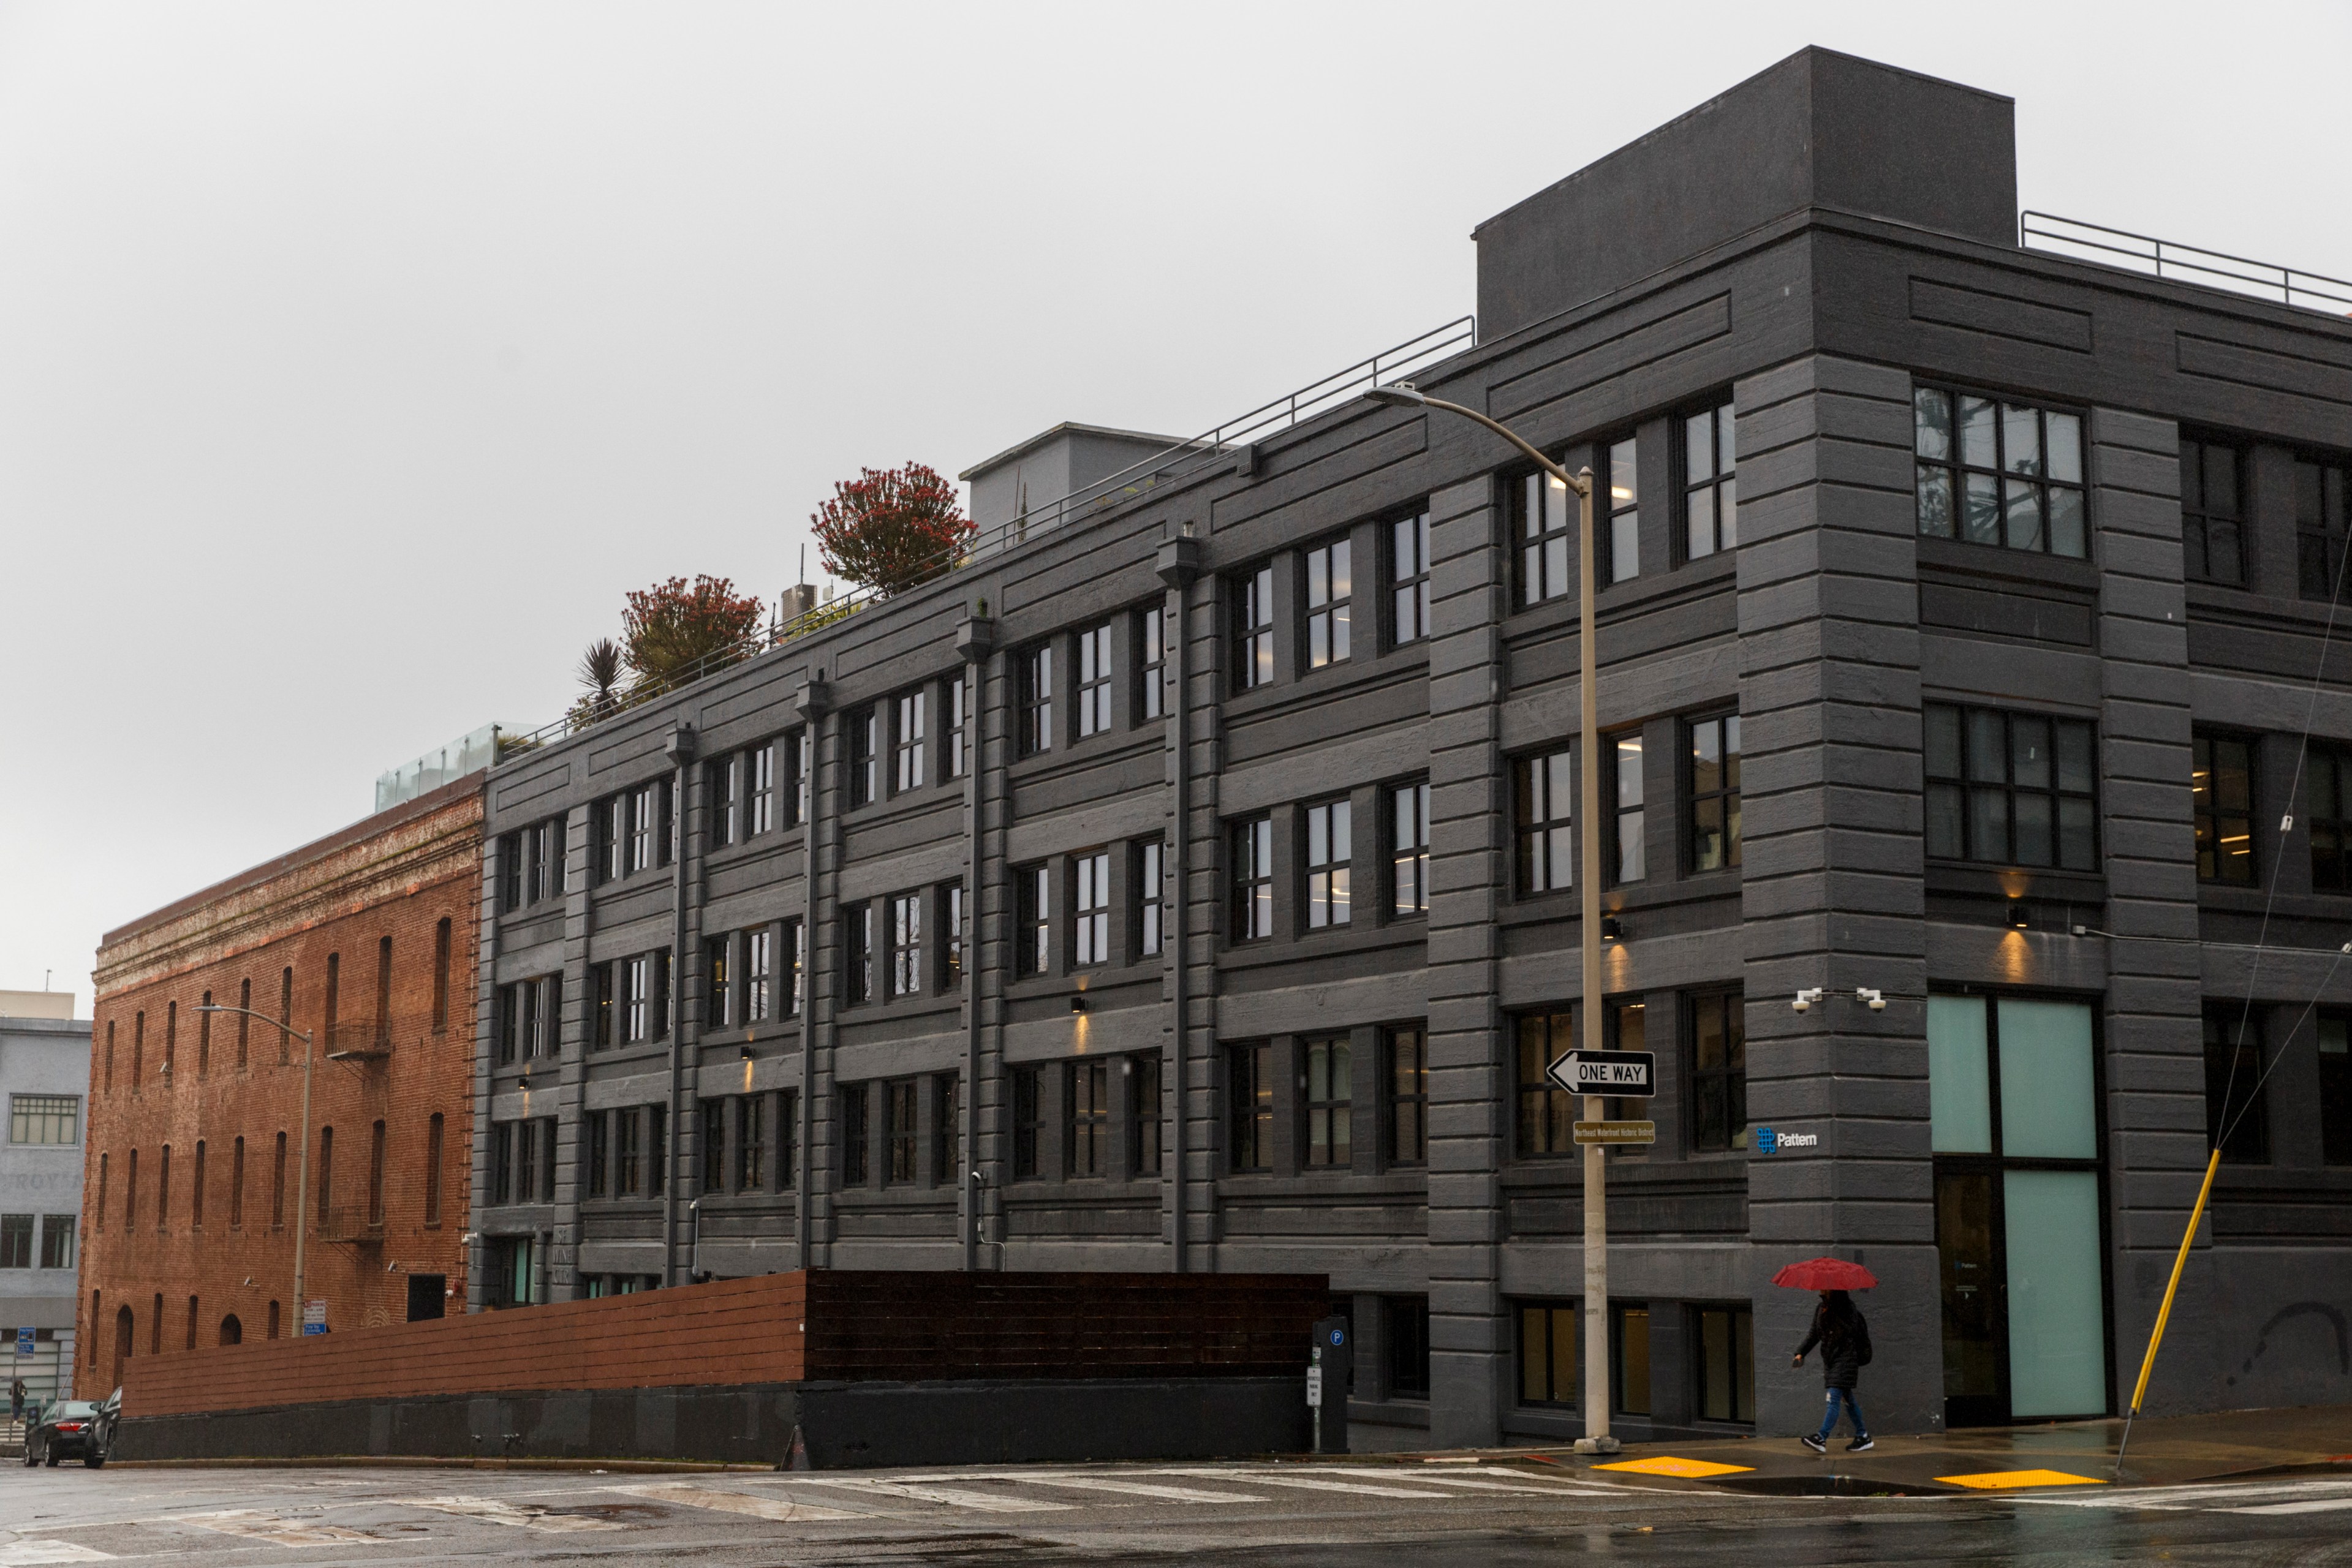 A modern gray building next to an older brick one on a wet street, with a person holding a red umbrella walking by.